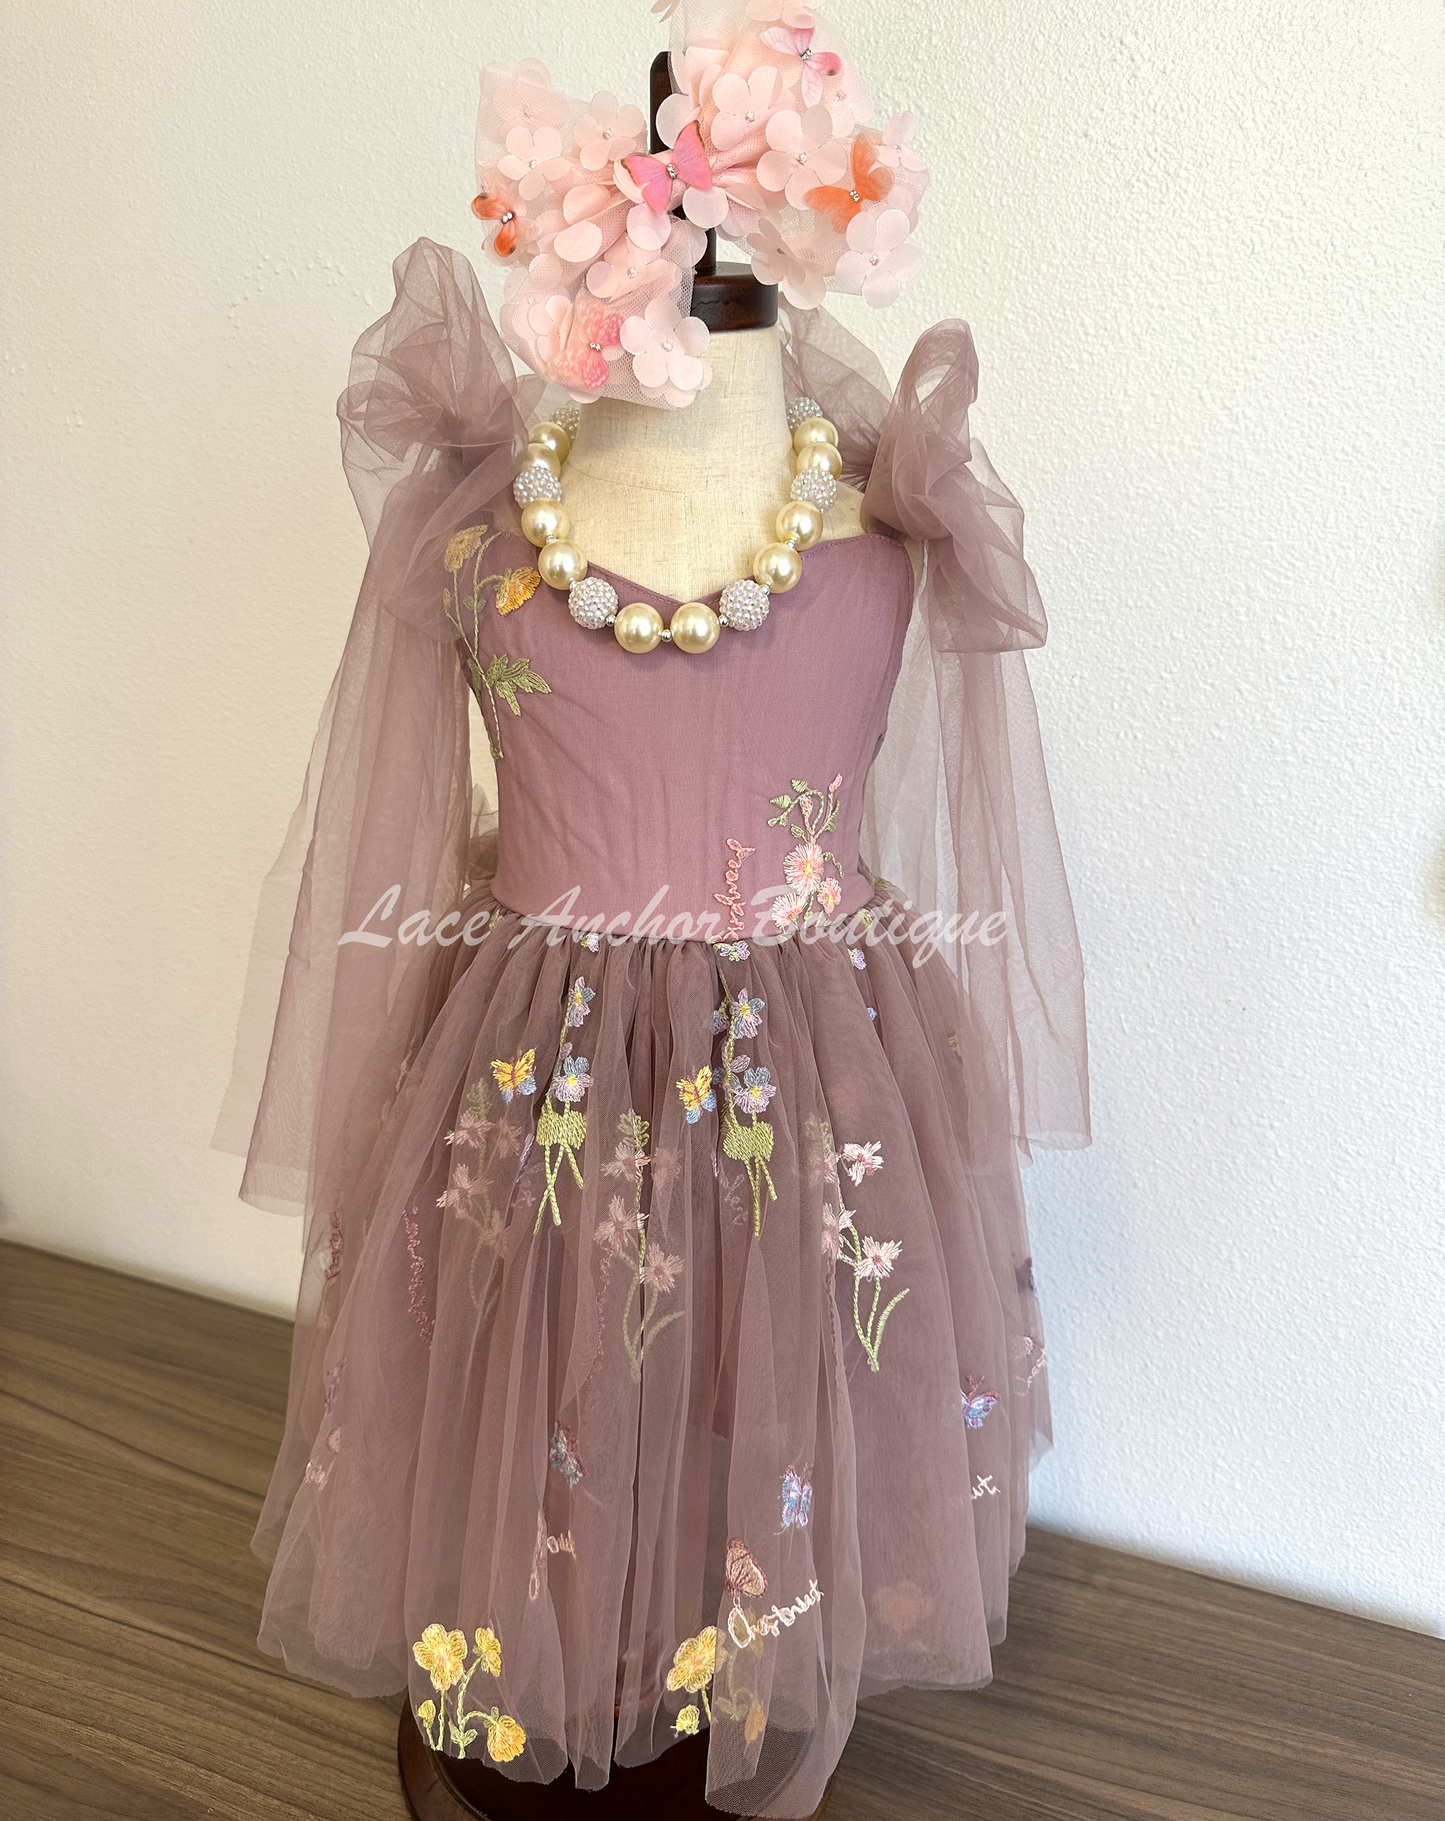 toddler youth puffy tied shoulder flower girl dress with large tied bow tied at waist. Outfits in deep plum purple with embroidered floral print.